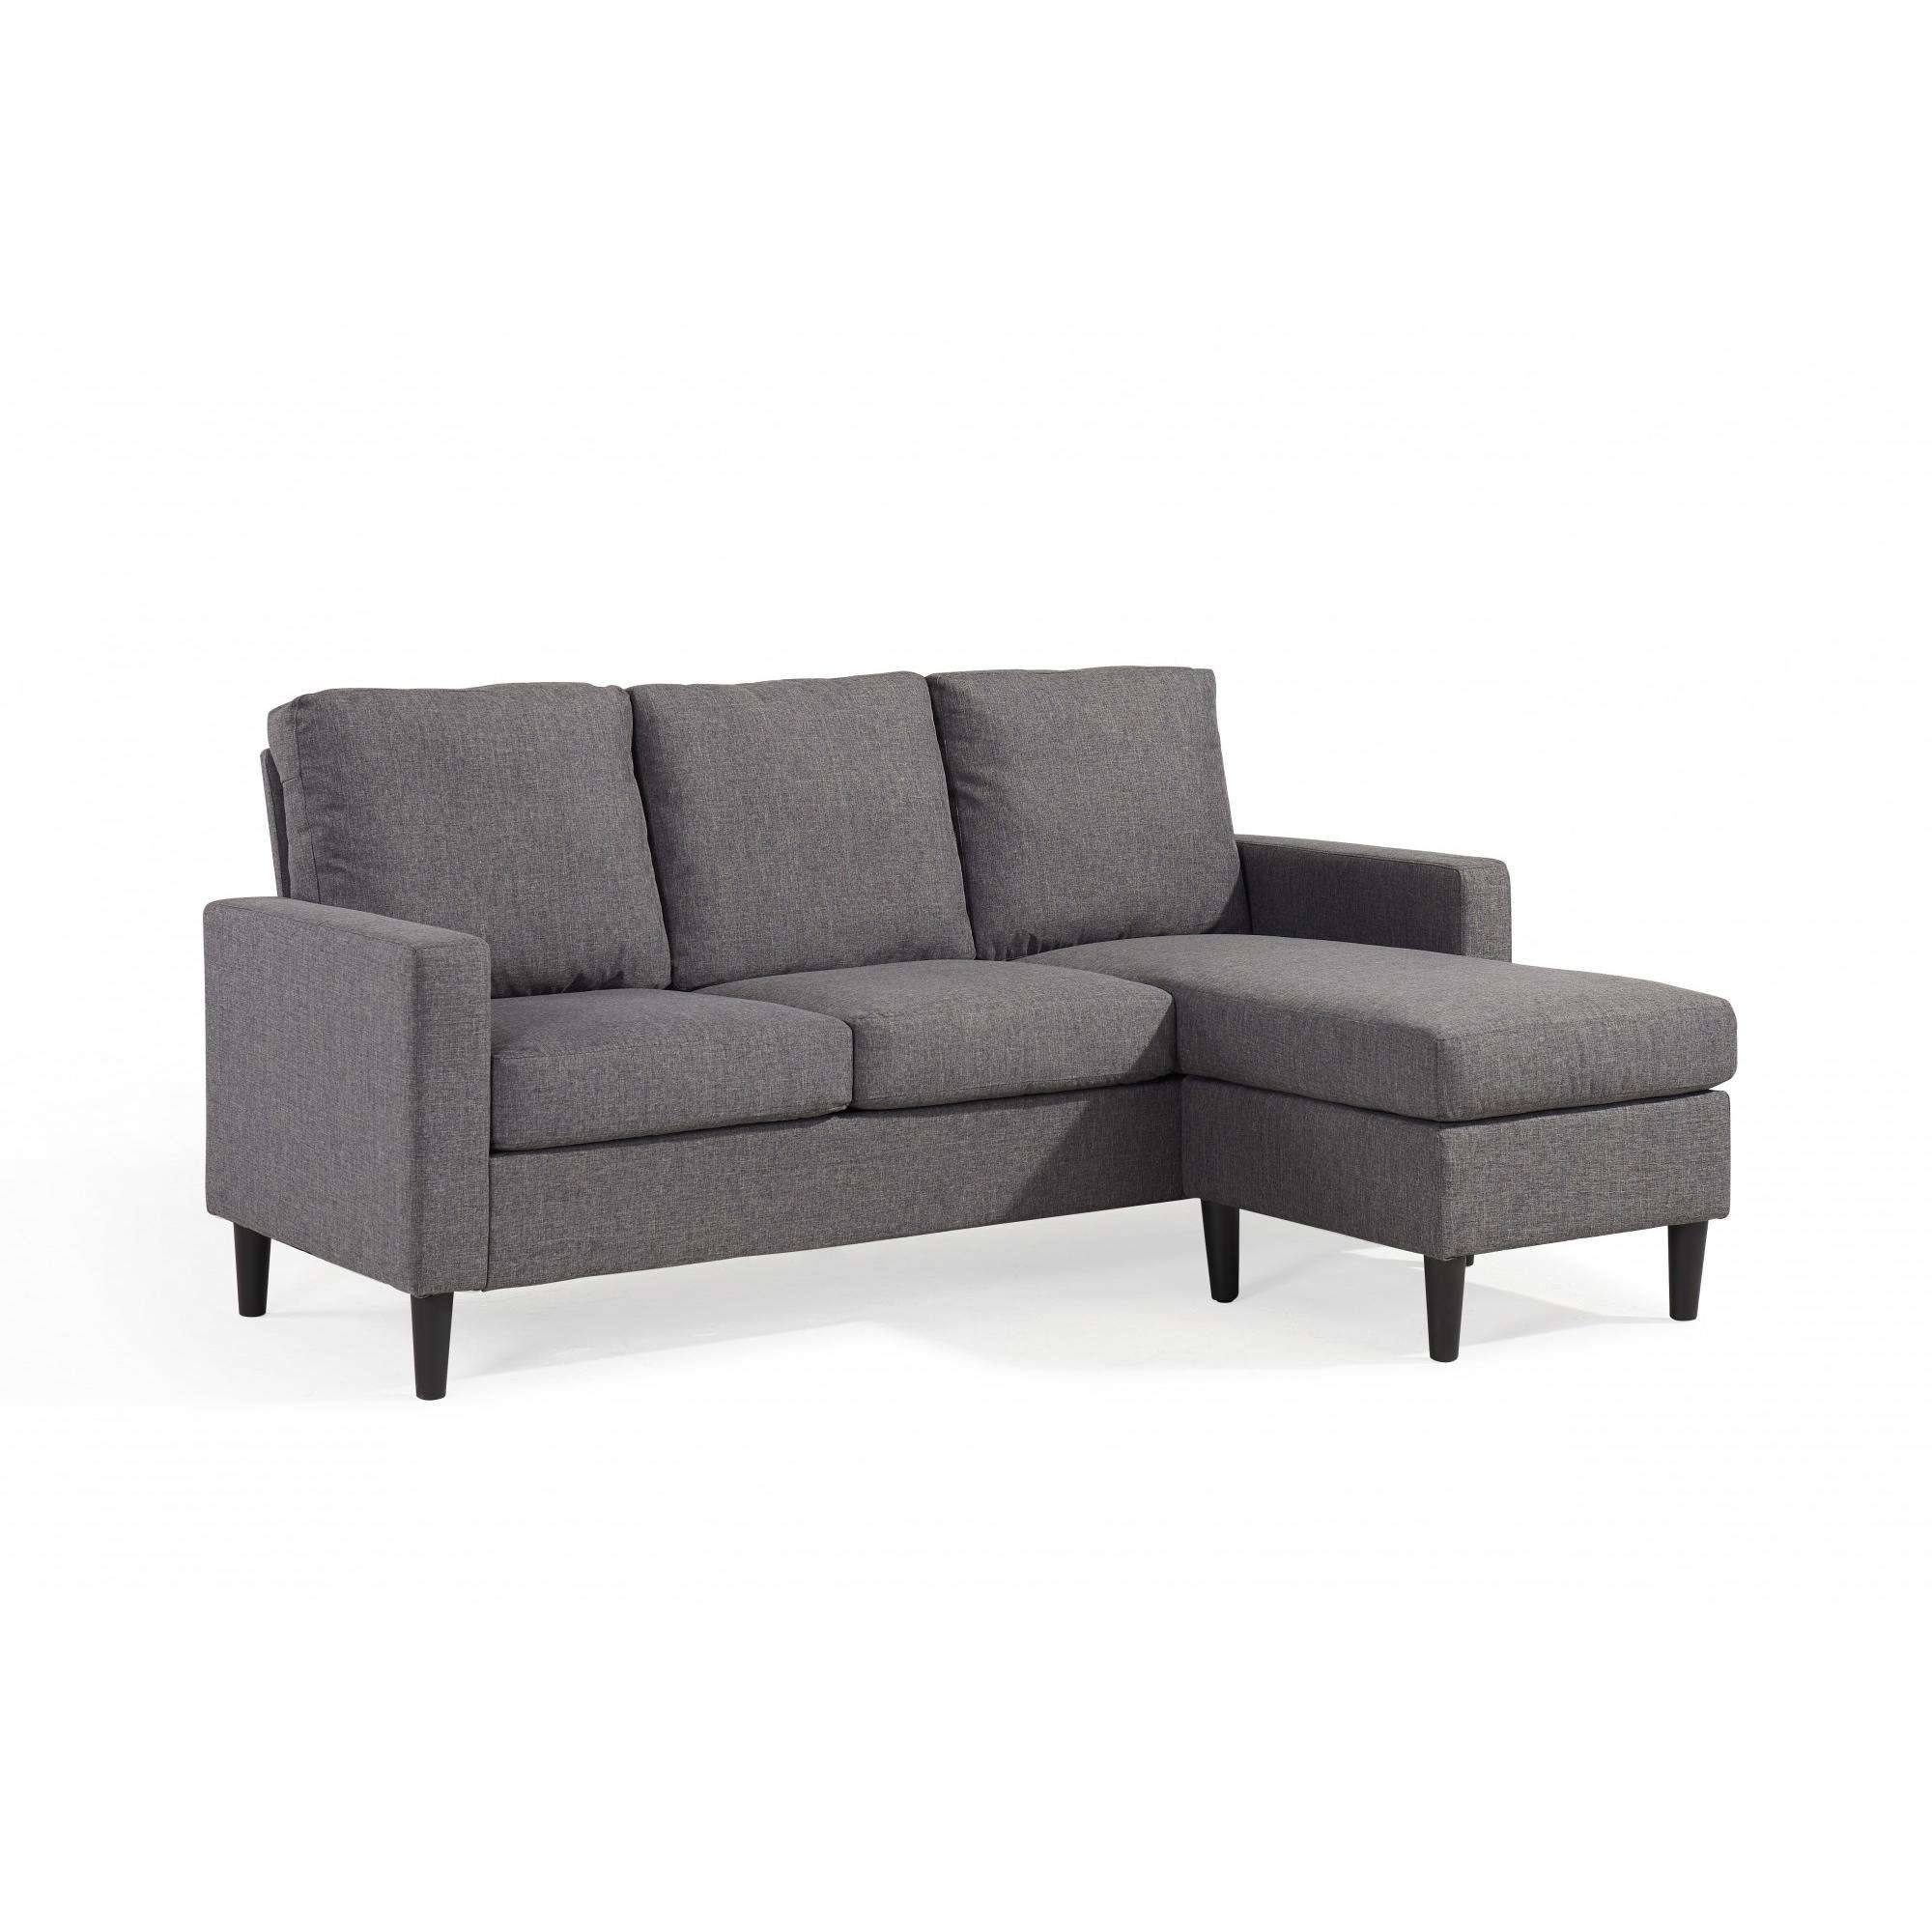 Mainstays Apartment Reversible Sectional, Multiple Colors - image 4 of 10